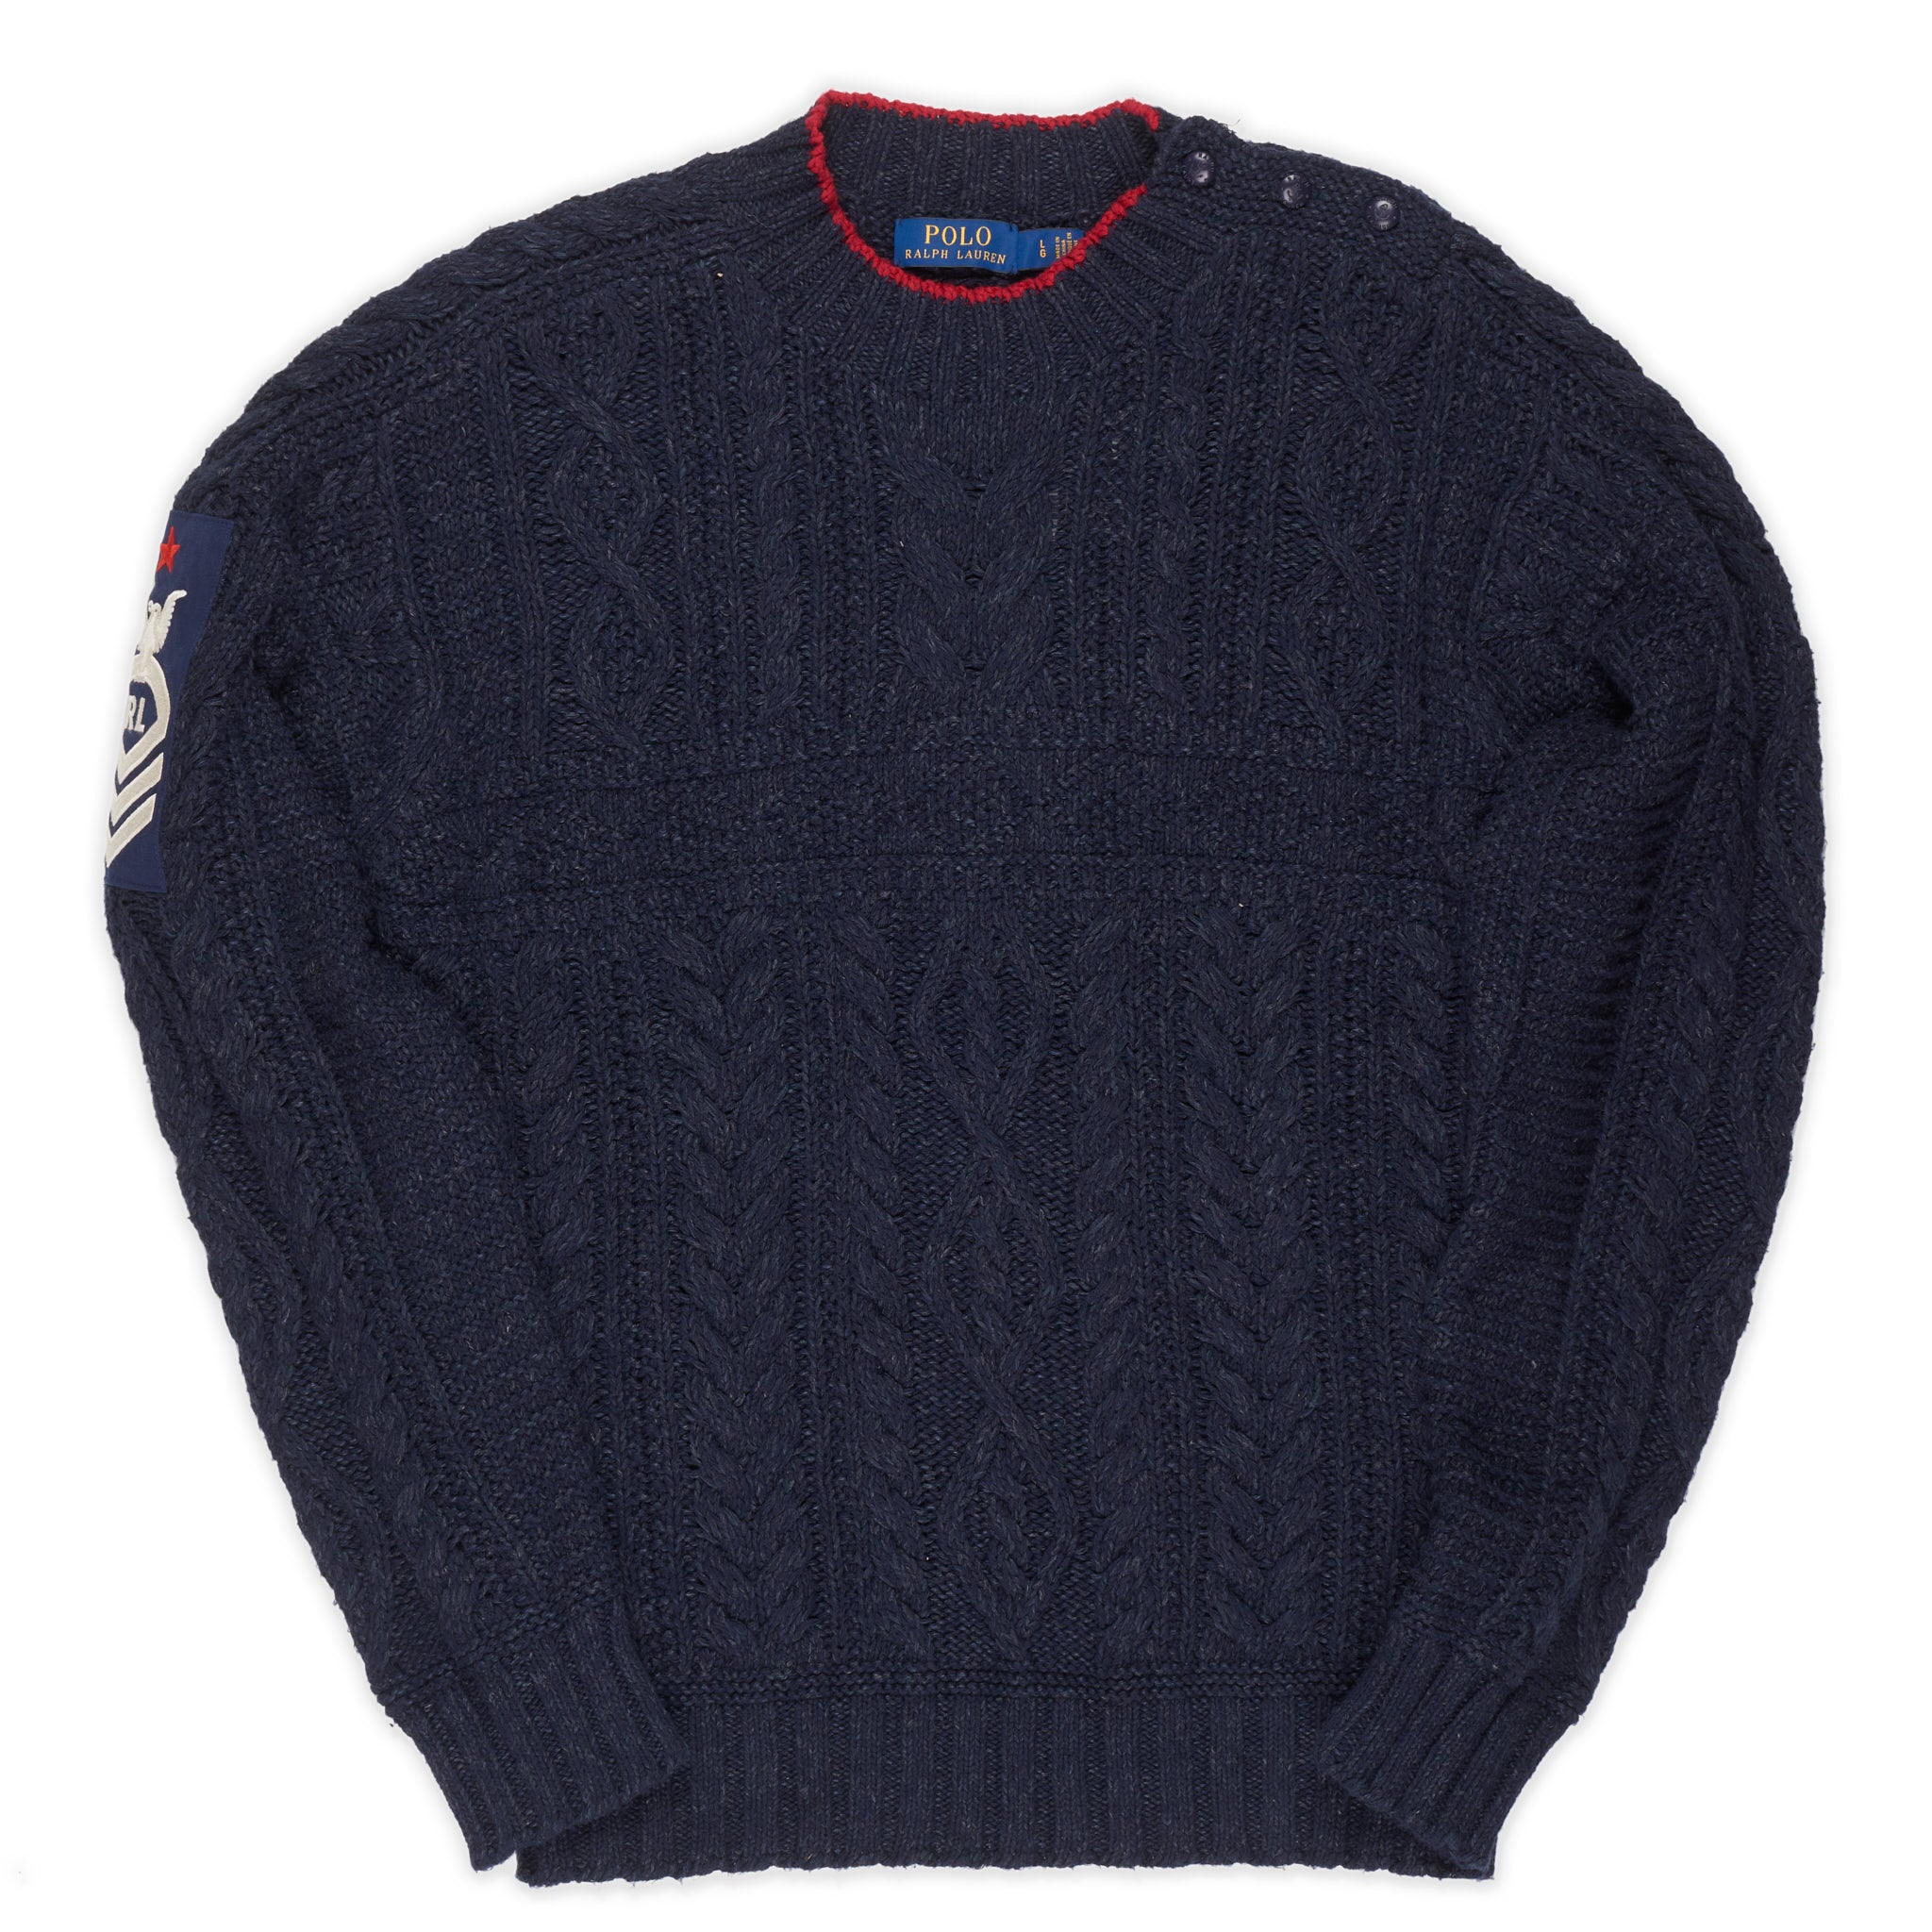 POLO RALPH LAUREN Navy Blue Cable Knit Crewneck Sweater Navy Badge NEW US L